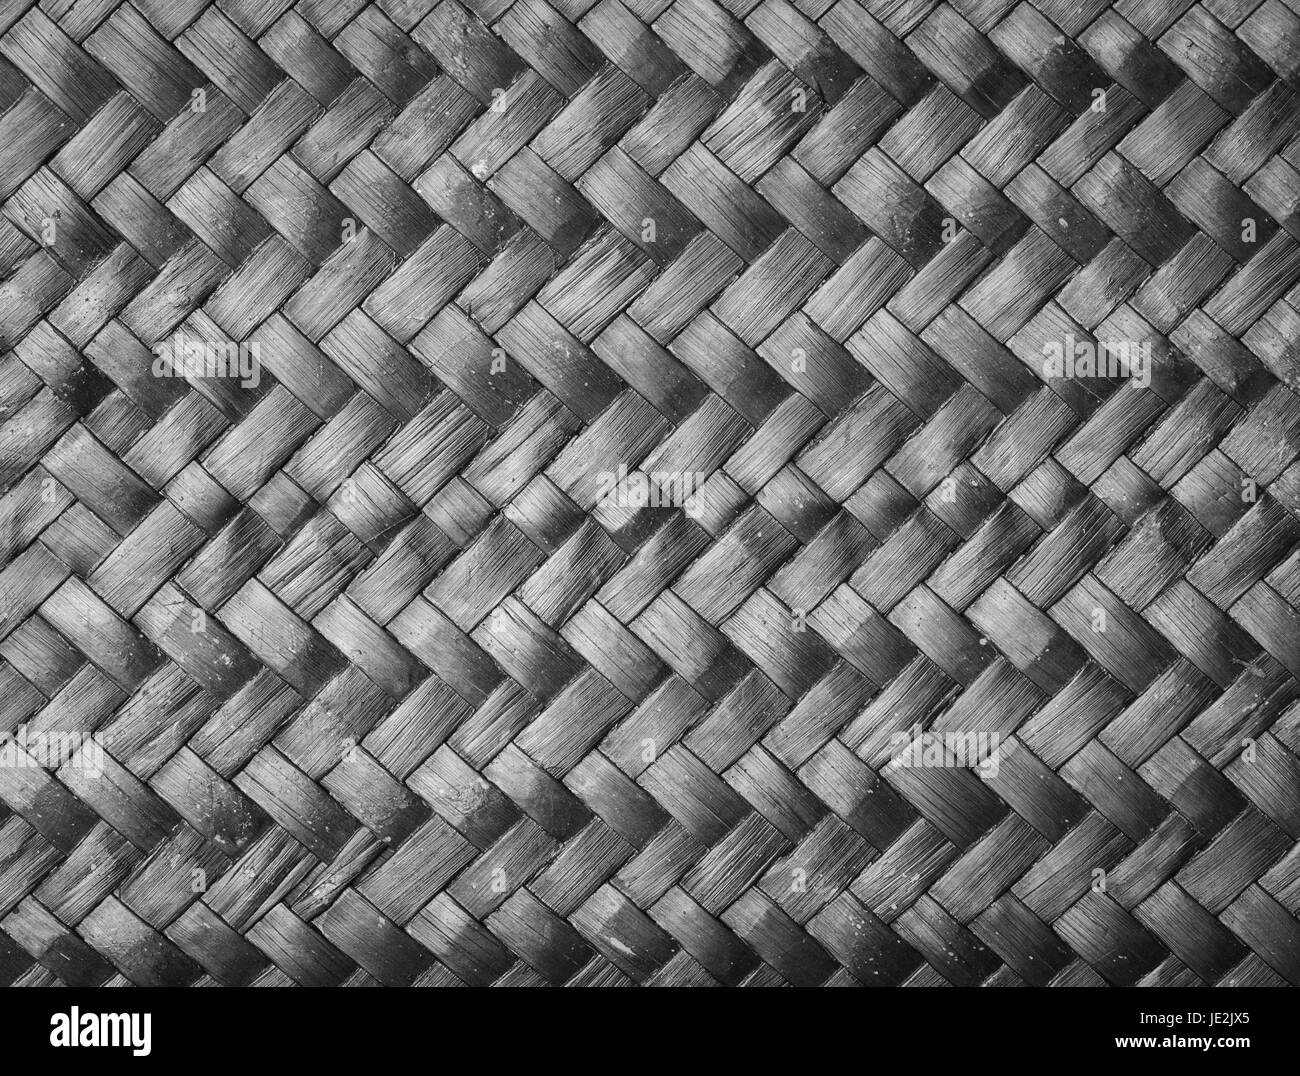 Bamboo weave pattern texture background Stock Photo